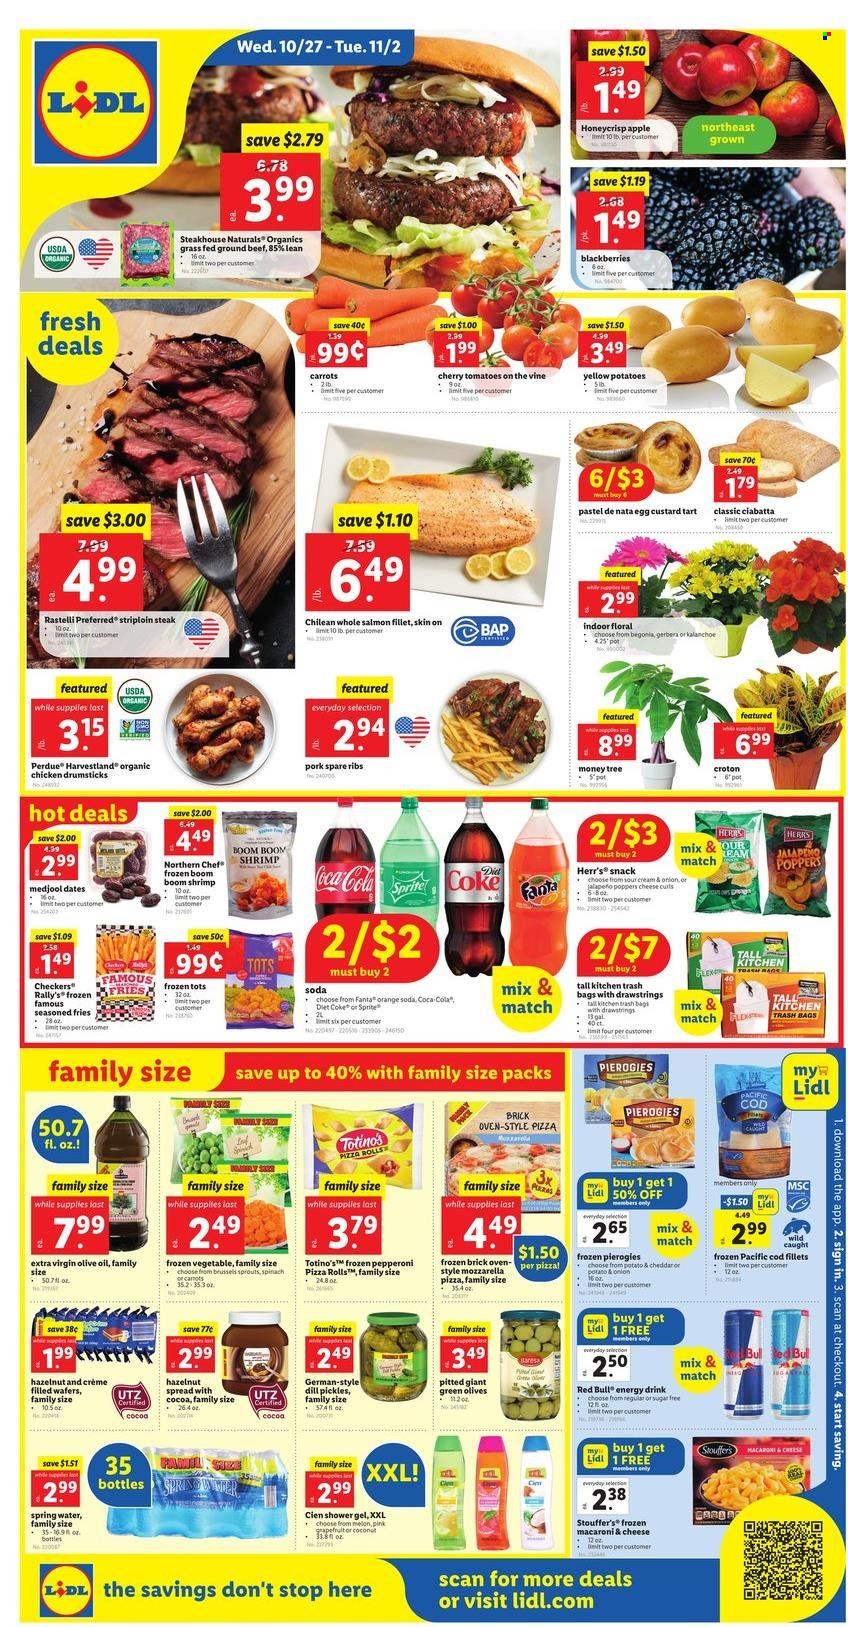 thumbnail - Lidl Flyer - 10/27/2021 - 11/02/2021 - Sales products - ciabatta, pizza rolls, tart, carrots, potatoes, jalapeño, brussel sprouts, blackberries, oranges, cod, salmon, salmon fillet, shrimps, macaroni & cheese, pizza, Perdue®, pepperoni, eggs, sour cream, Stouffer's, potato fries, wafers, snack, olives, dill, extra virgin olive oil, olive oil, hazelnut spread, dried dates, Coca-Cola, Sprite, Fanta, energy drink, Diet Coke, Red Bull, spring water, soda, chicken drumsticks, beef meat, ground beef, steak, striploin steak, pork meat, pork ribs, pork spare ribs, shower gel, trash bags, pot, gerbera, begonia, melons. Page 1.